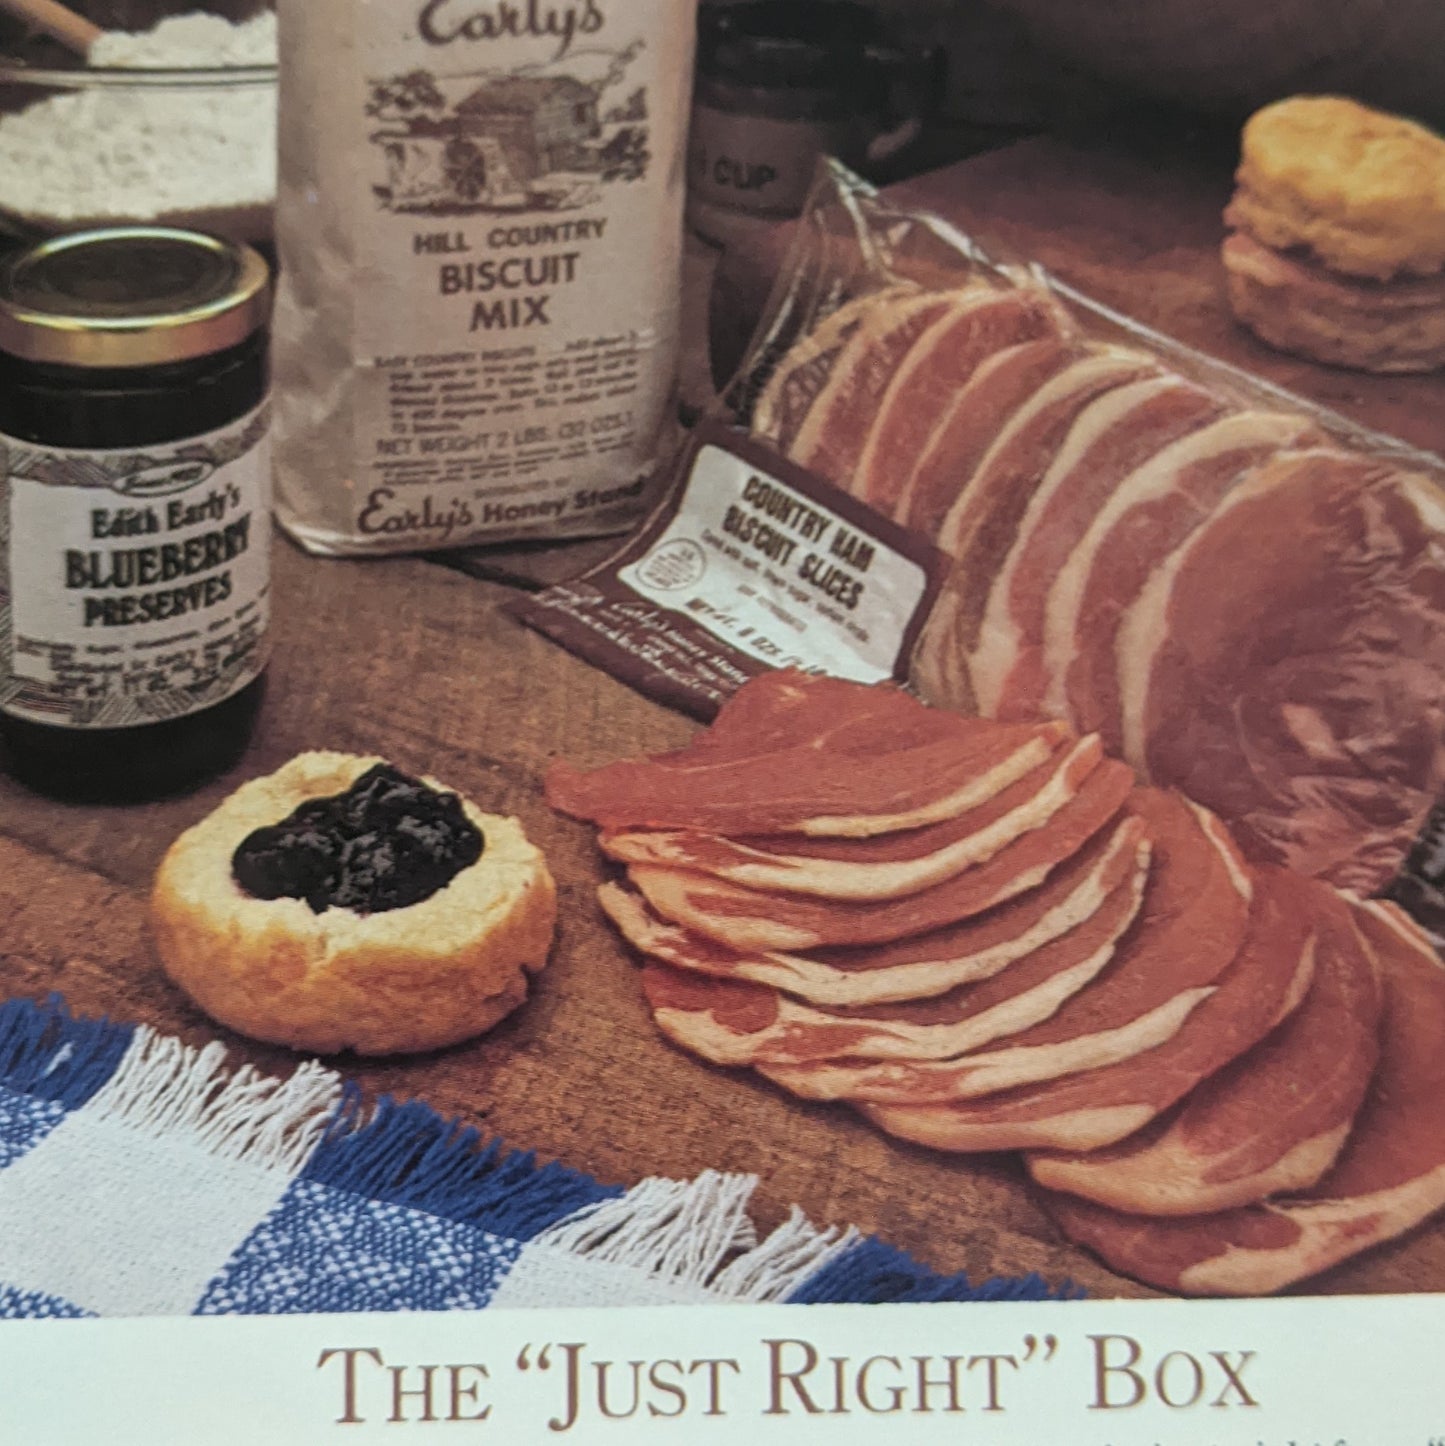 The "Just Right" Box